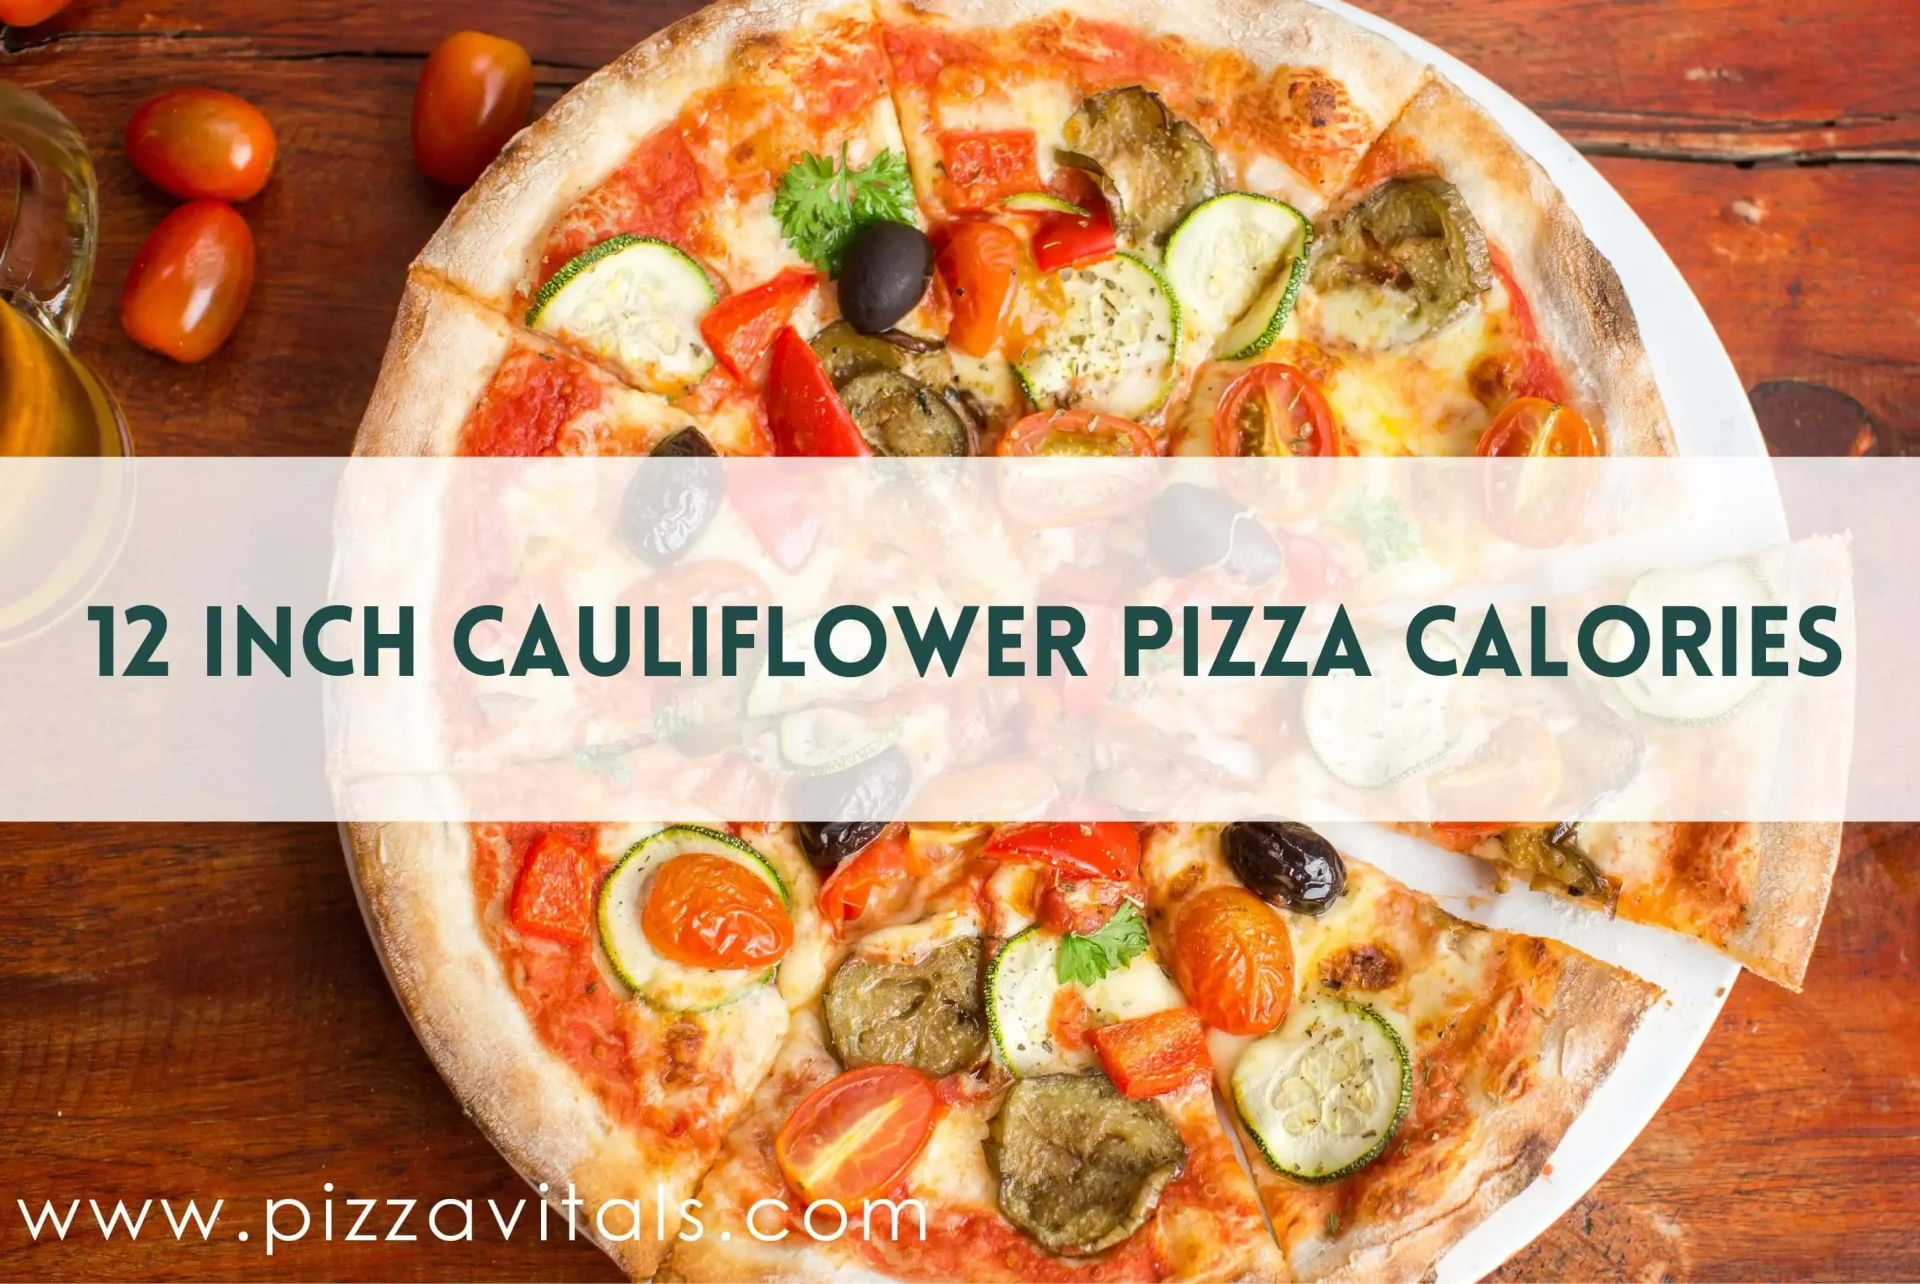 12 Inch Cauliflower Pizza Calories: Healthy, Nutritious, and Tasty Option